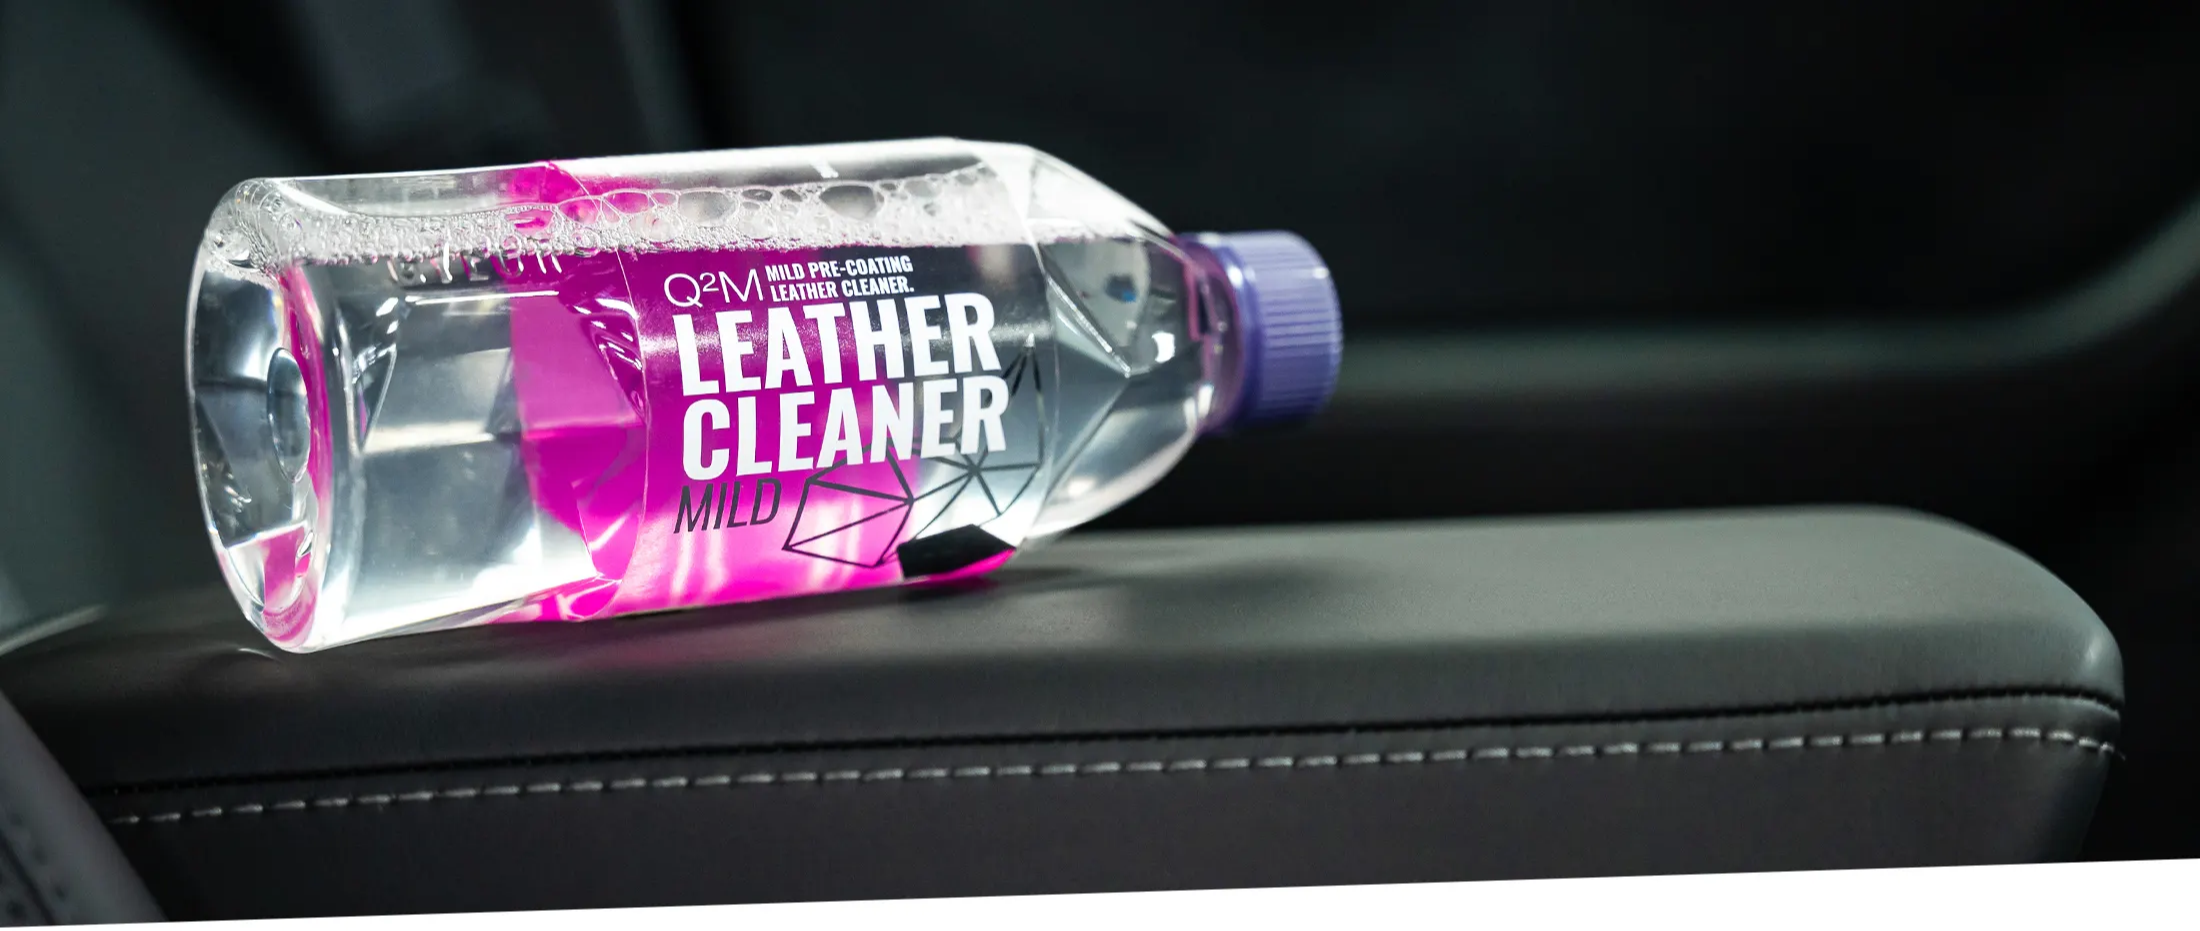 gentle leather cleaner